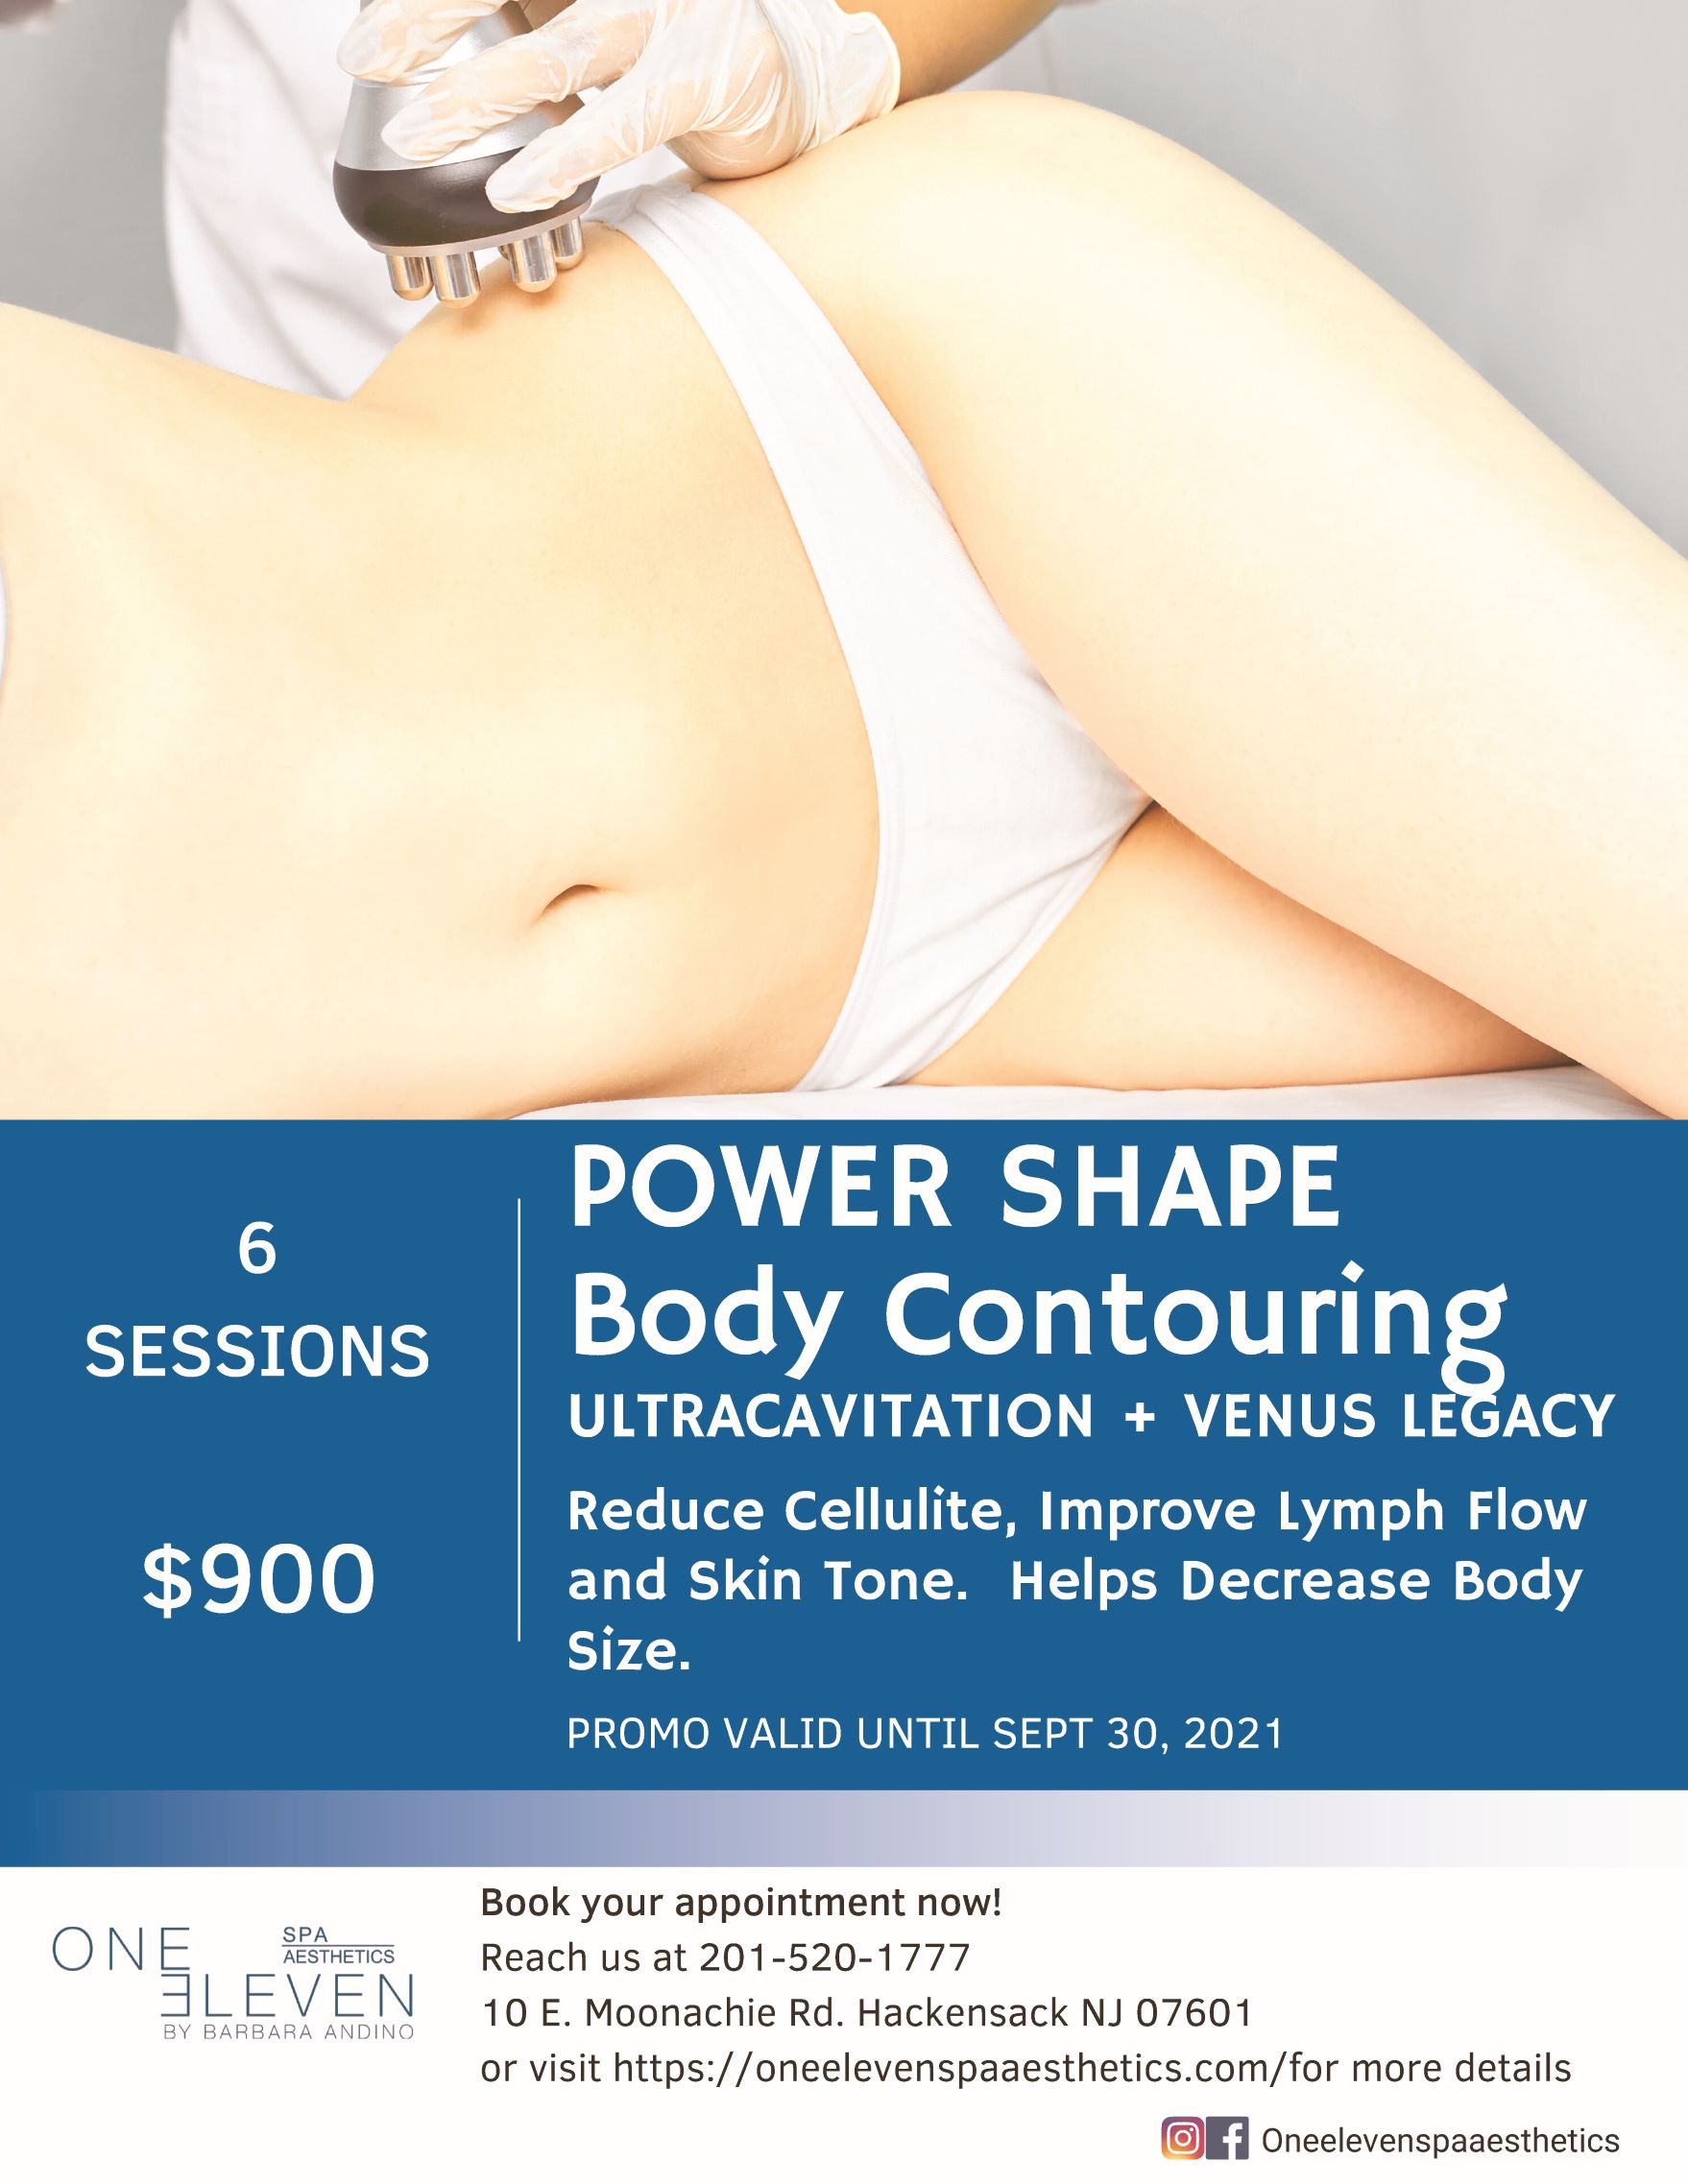 body contouring ultracavitation and venus legacy